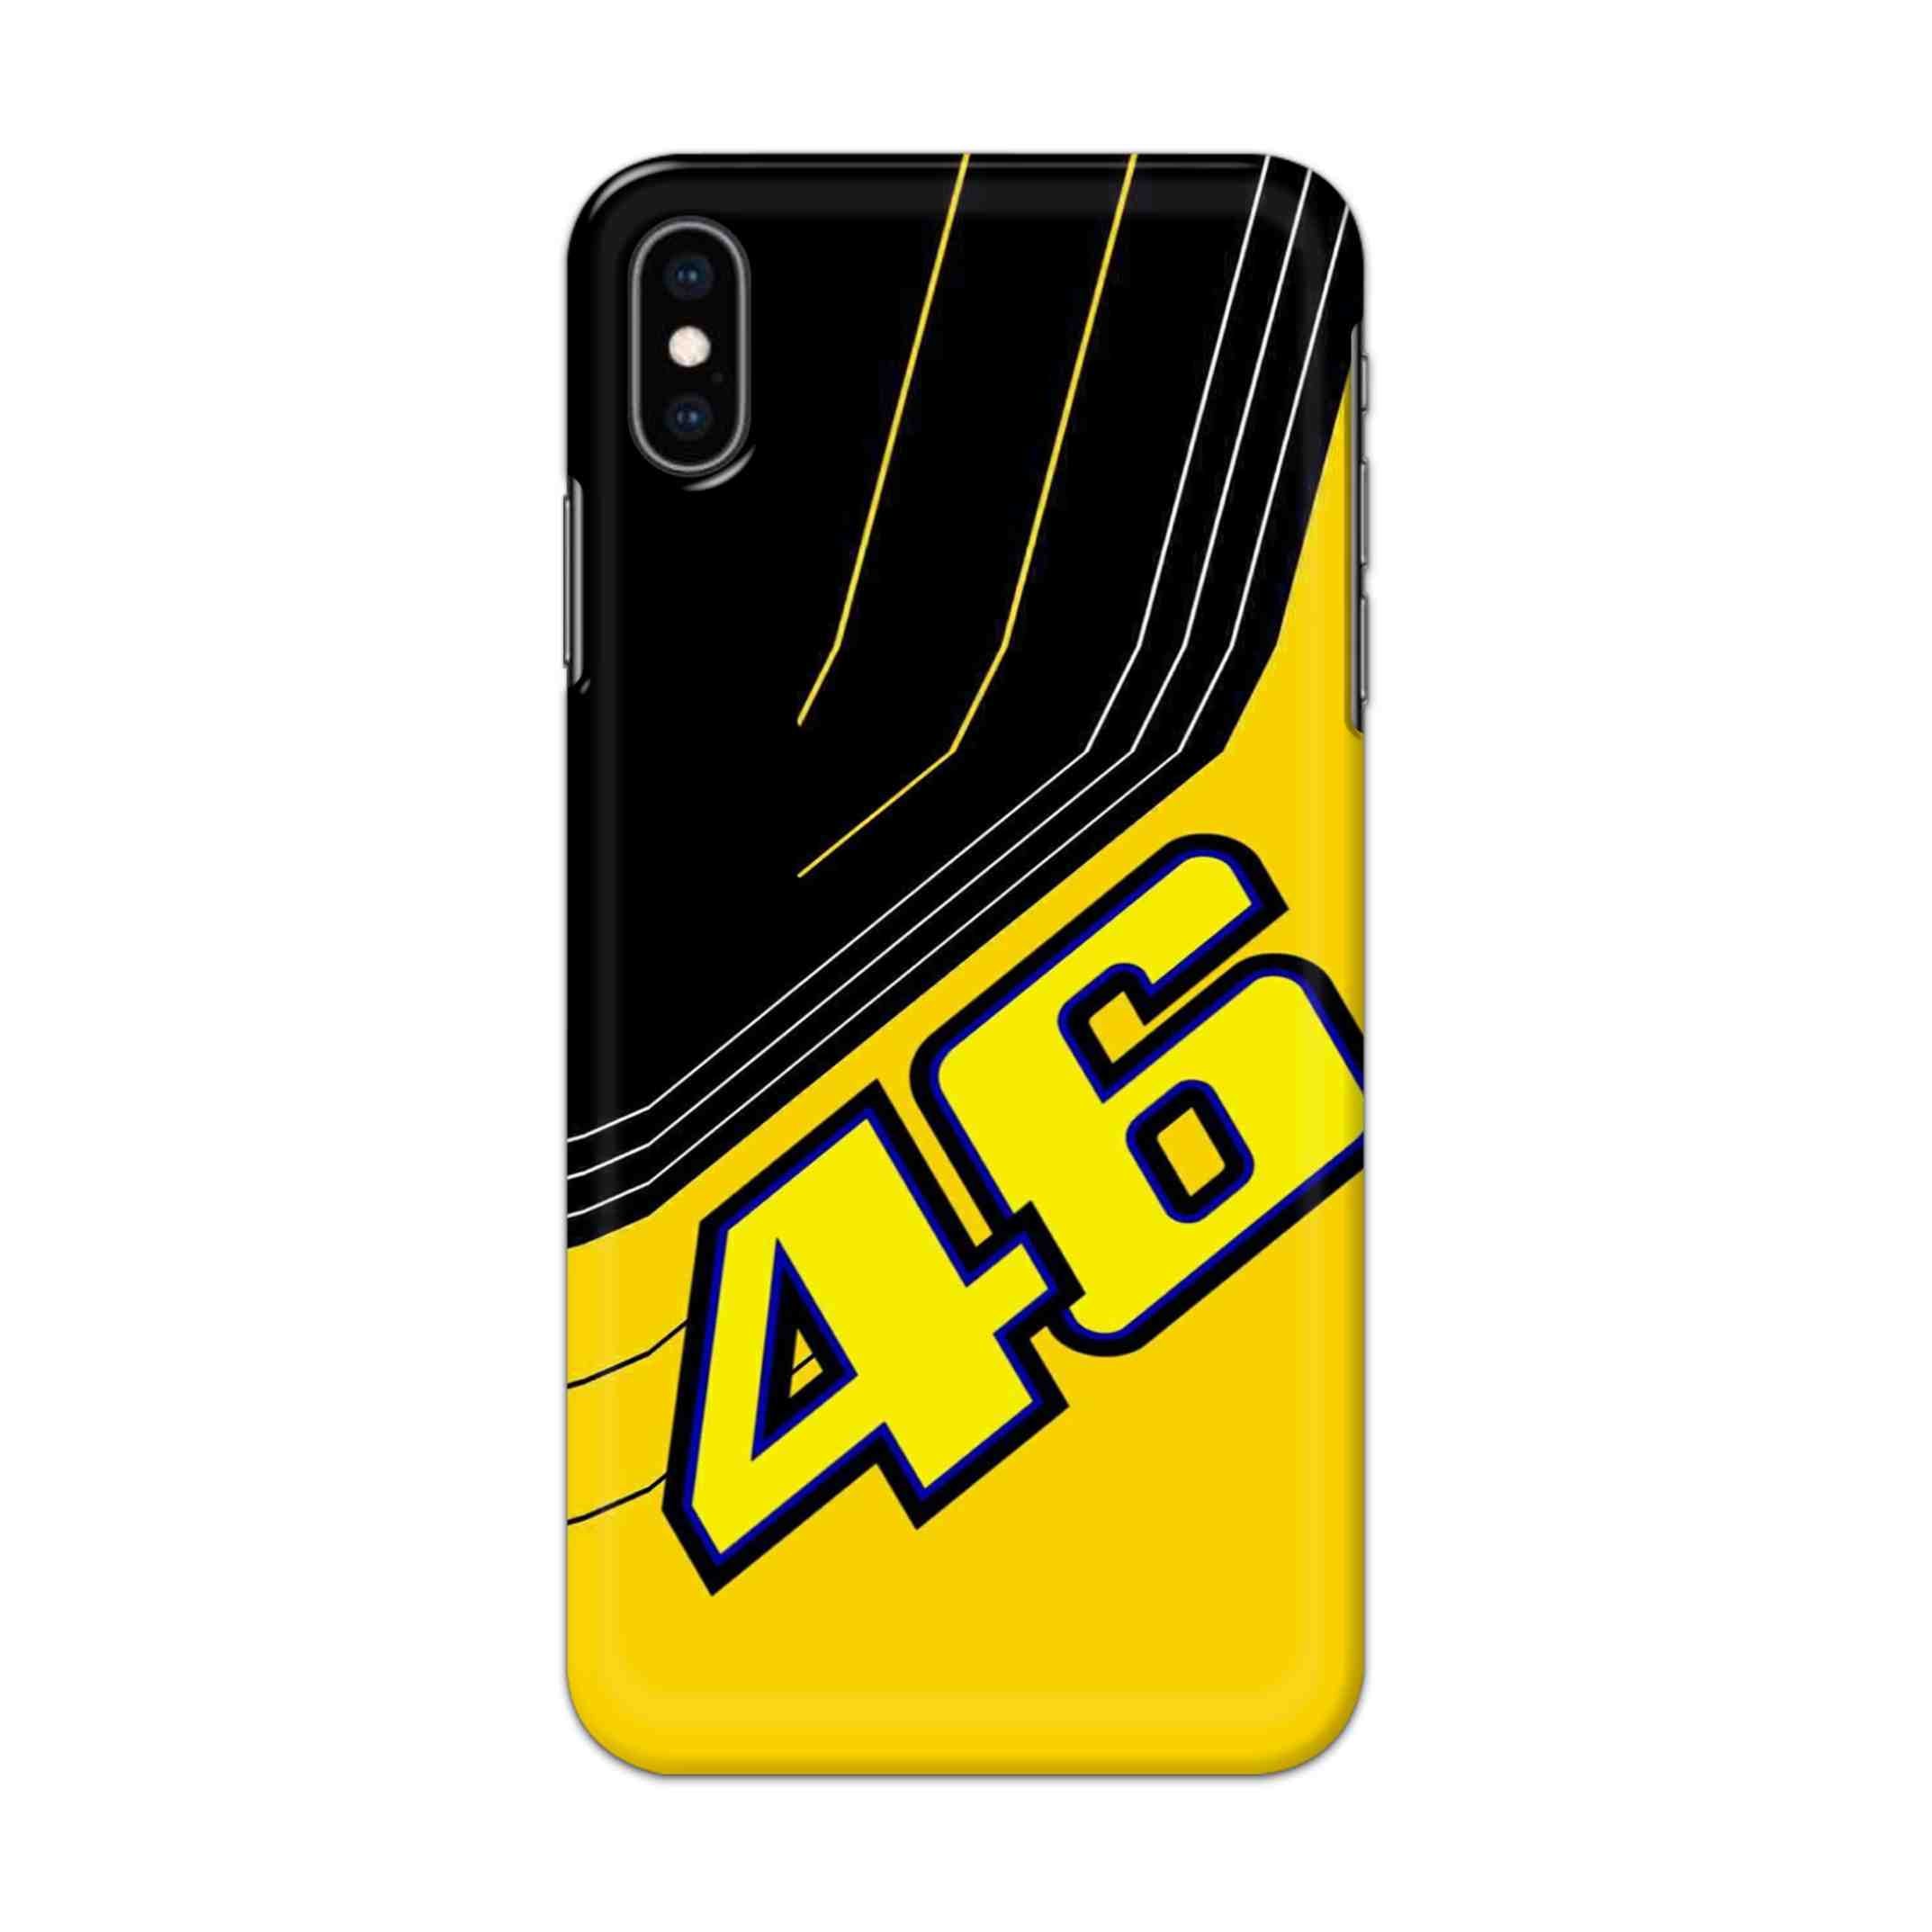 Buy 46 Hard Back Mobile Phone Case/Cover For iPhone XS MAX Online